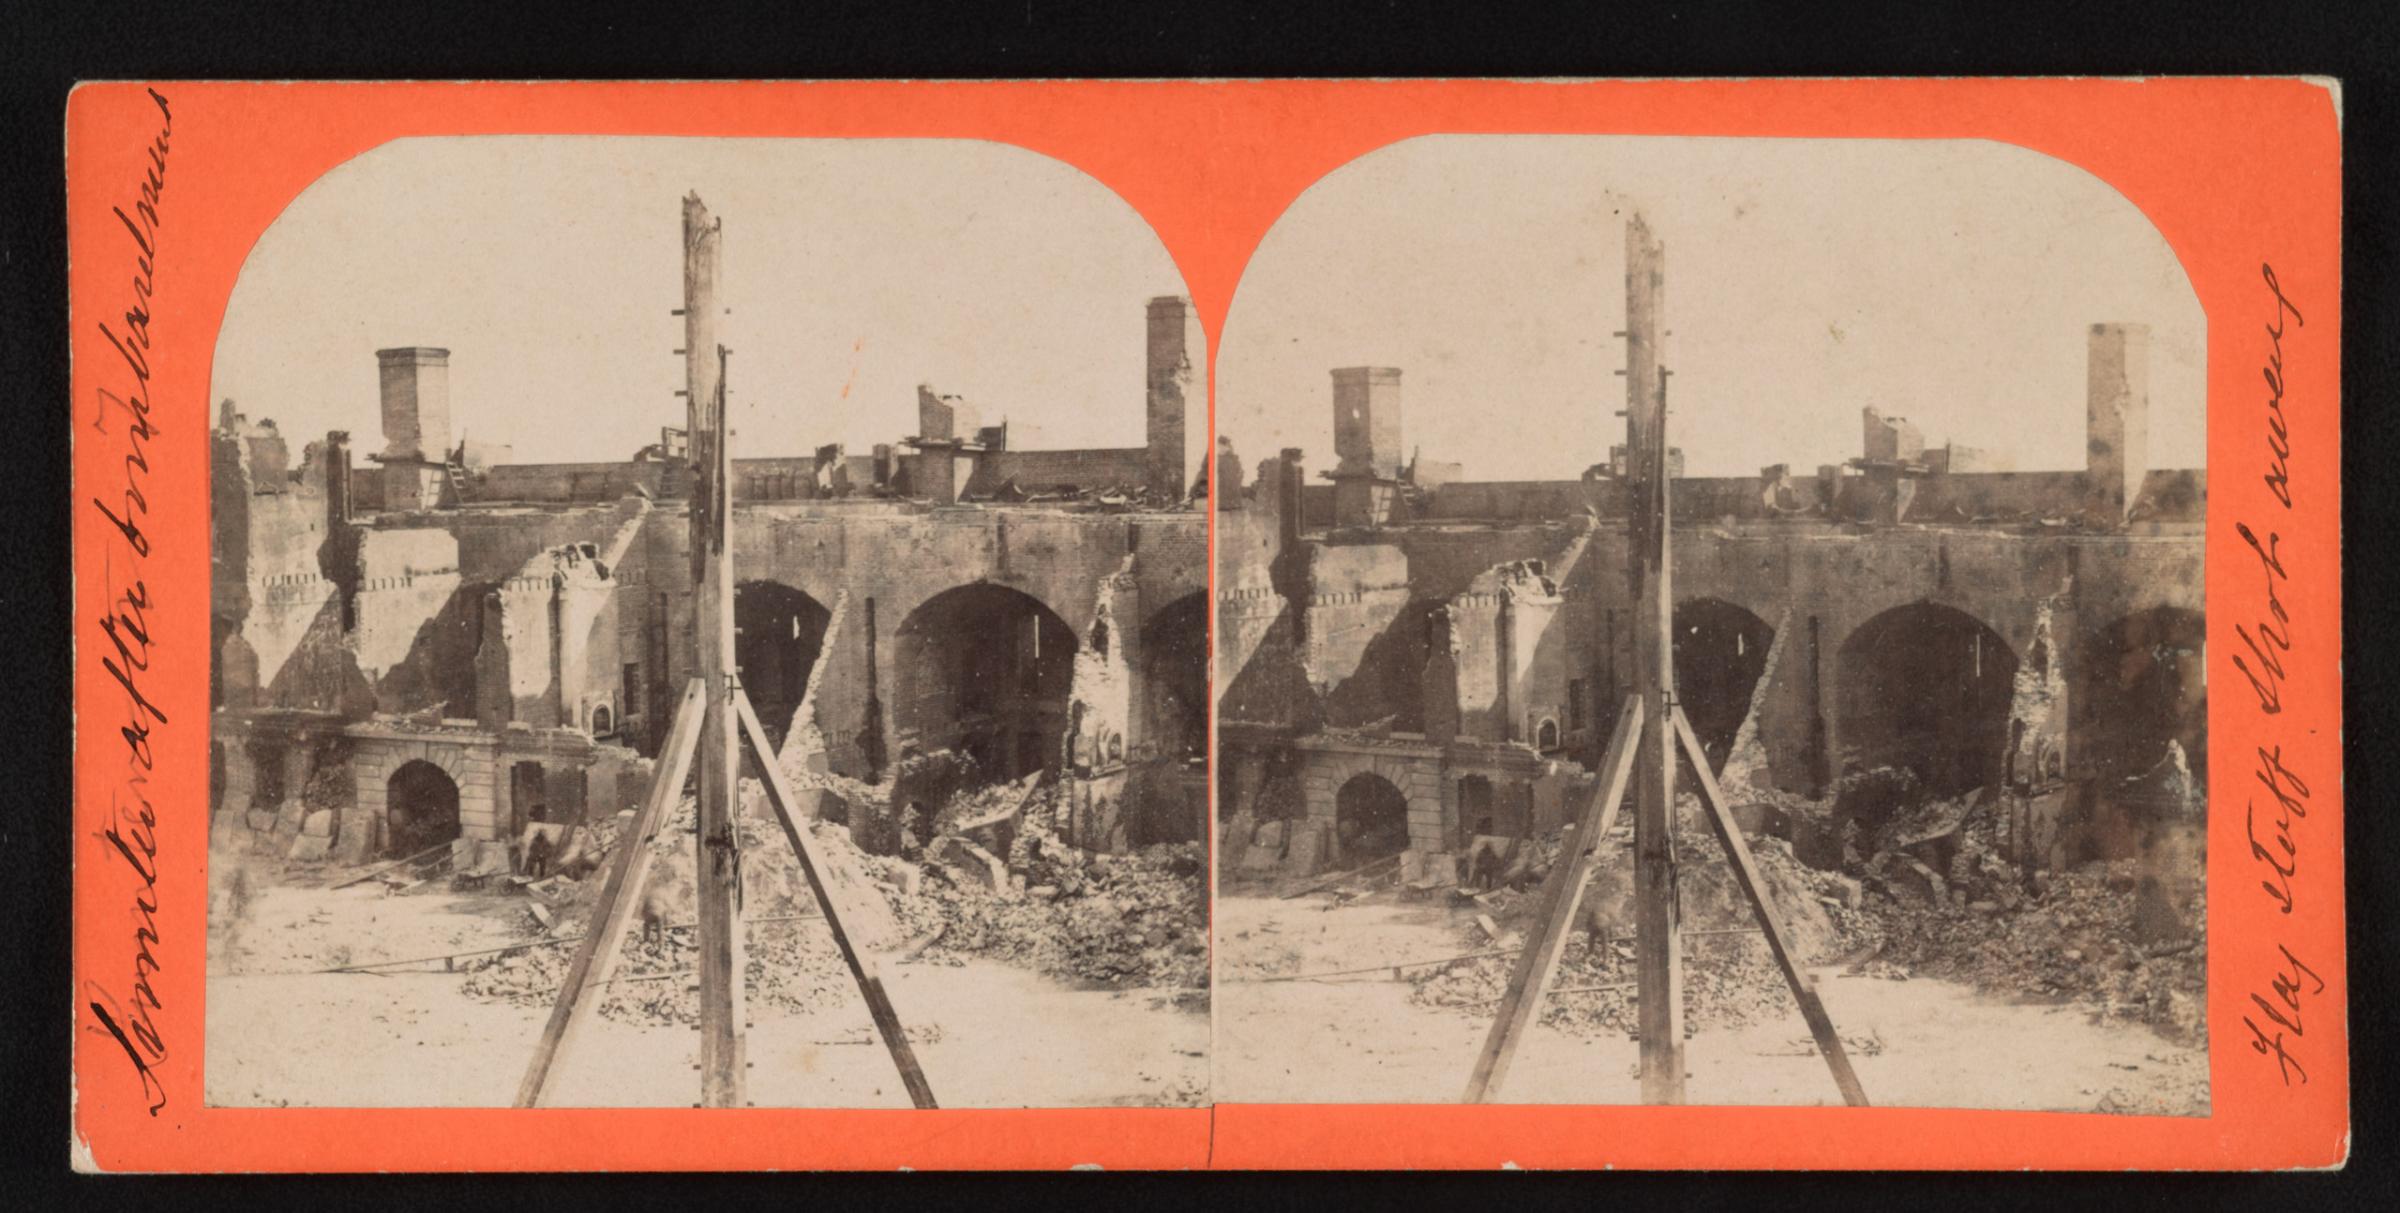 Civil War Stereograph from the Library of Congress